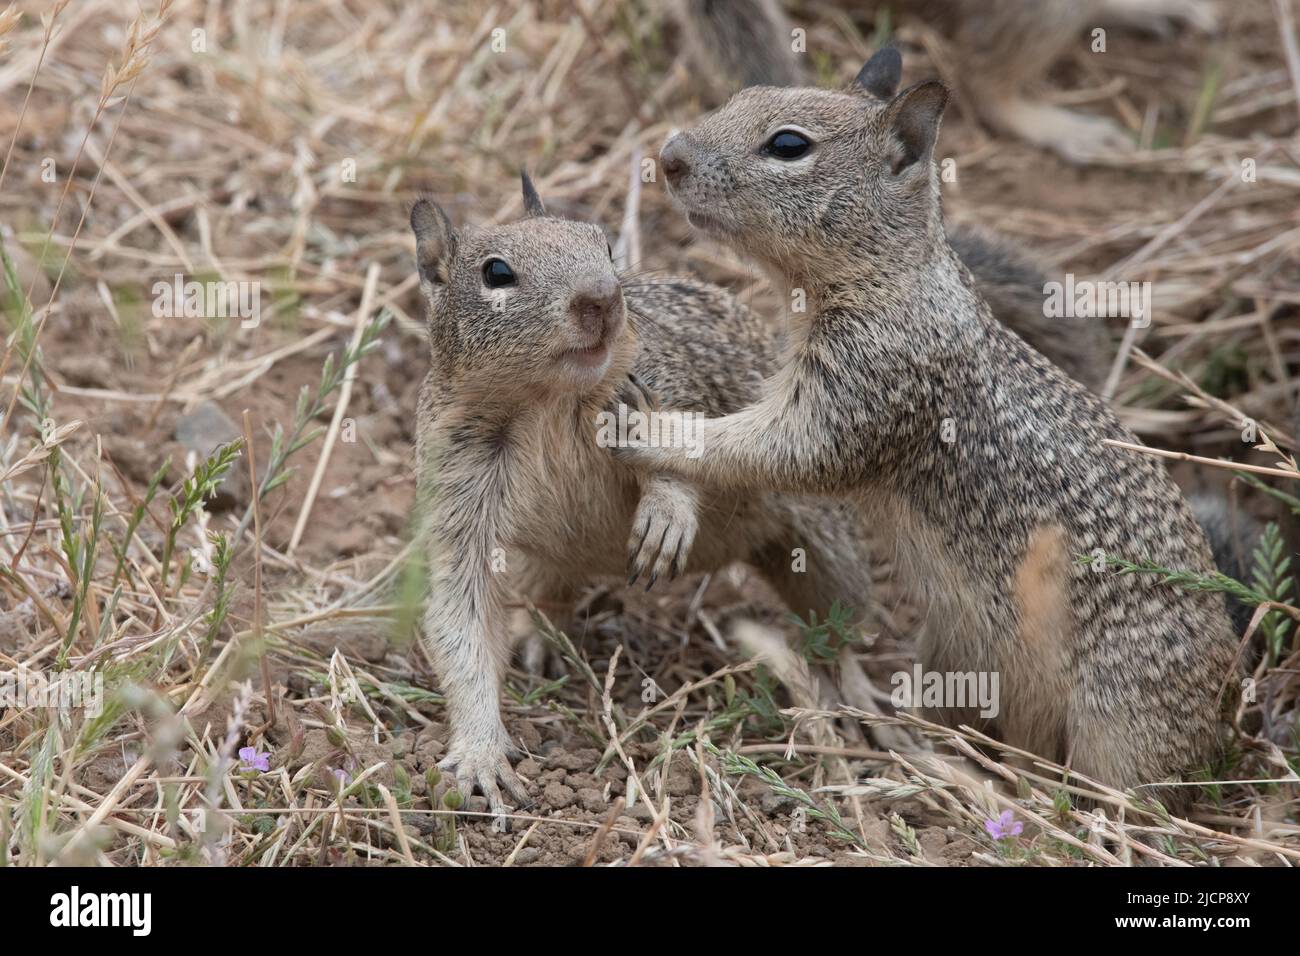 California ground squirrels (Otospermophilus beecheyi) a pair of juveniles playing together in the San Francisco bay region of California. Stock Photo